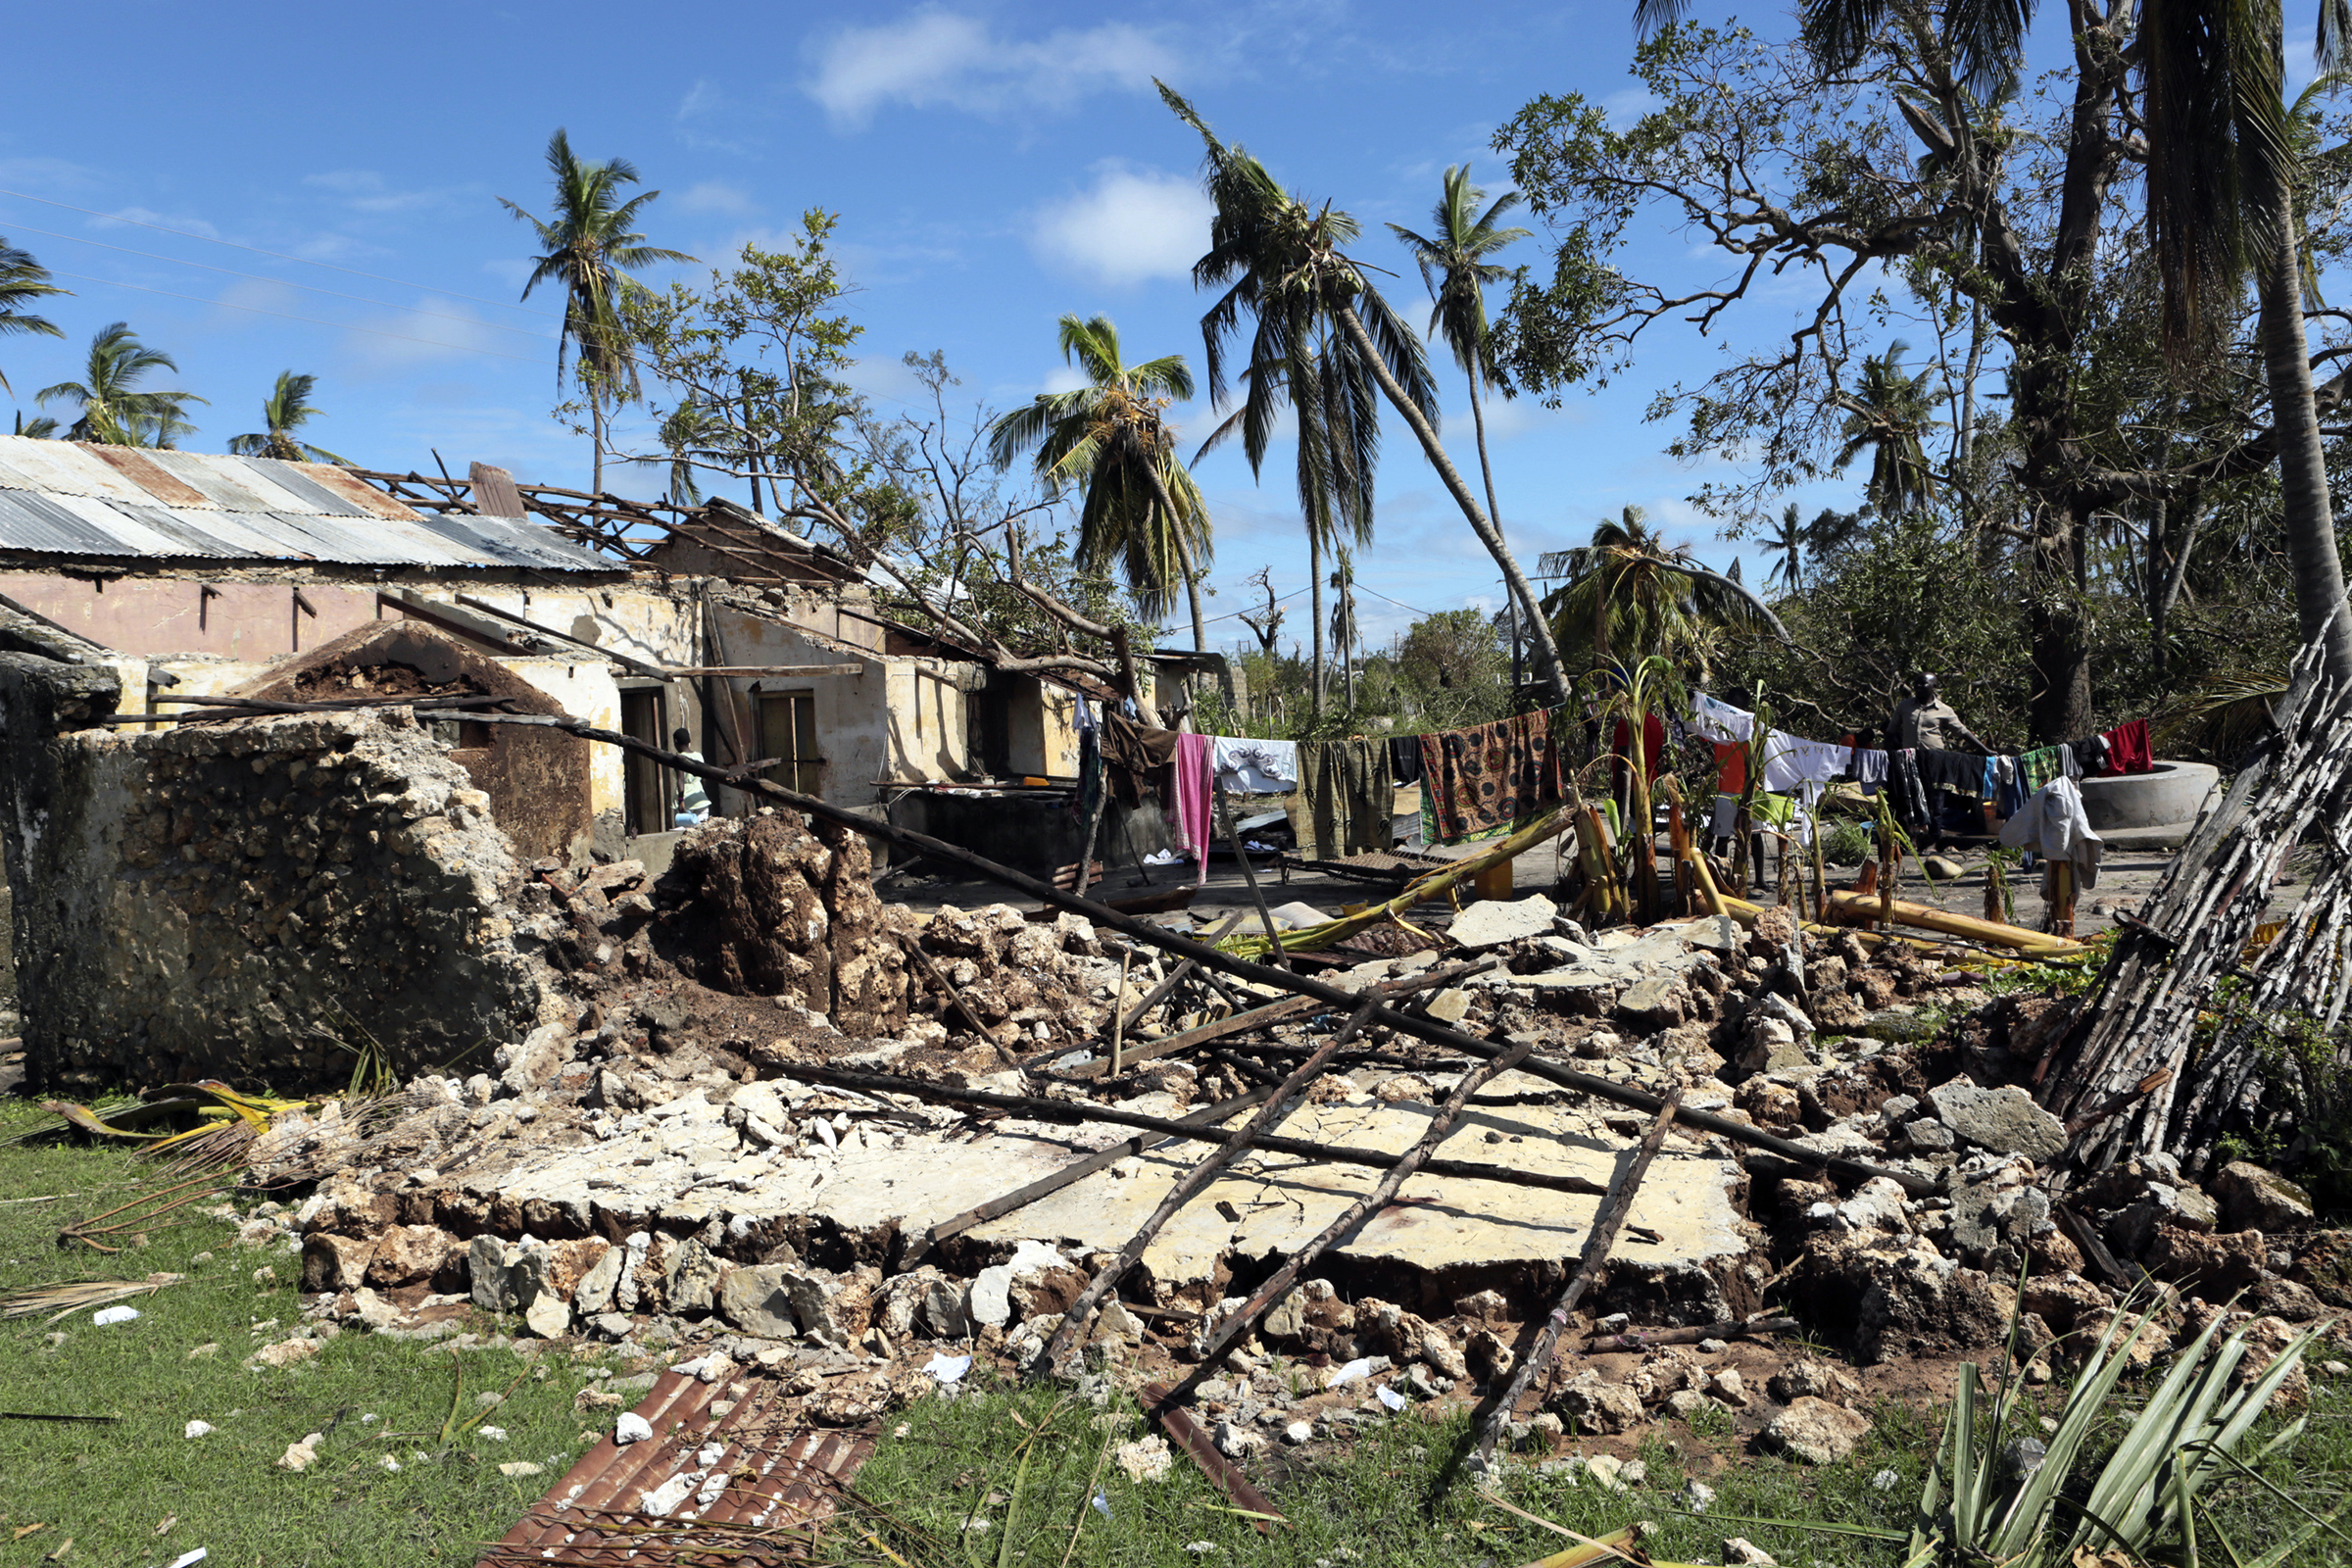 Clothes are seen on a drying line at a house damaged by Cyclone Kenneth in Ibo island north of Pemba city in Mozambique on May, 1, 2019. (Tsvangirayi Mukwazhi—AP)